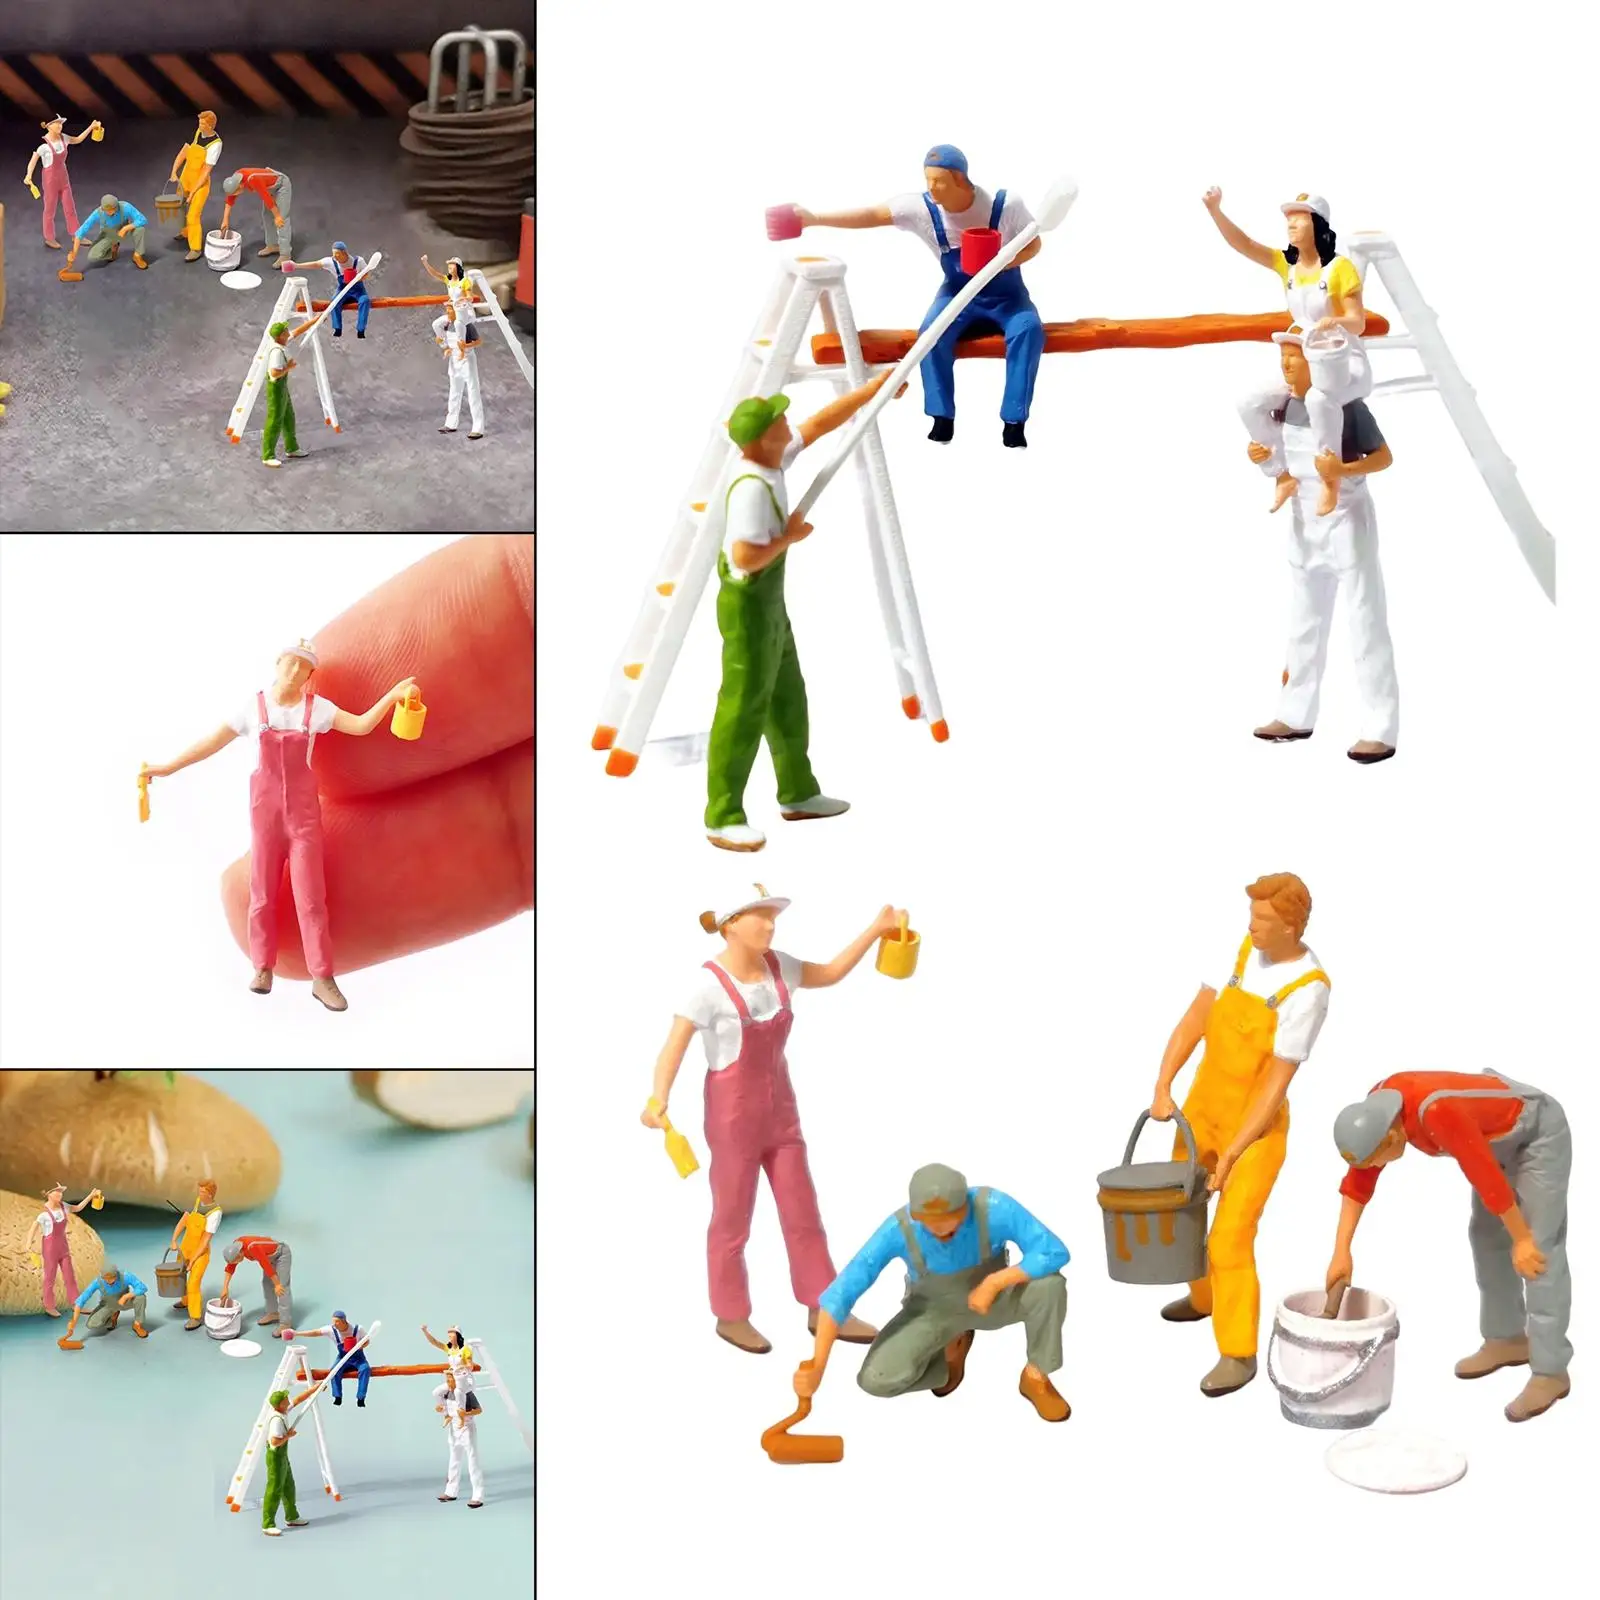 1:87 Figure Painter Resin Doll for Model Train Railway Dioramas DIY Projects